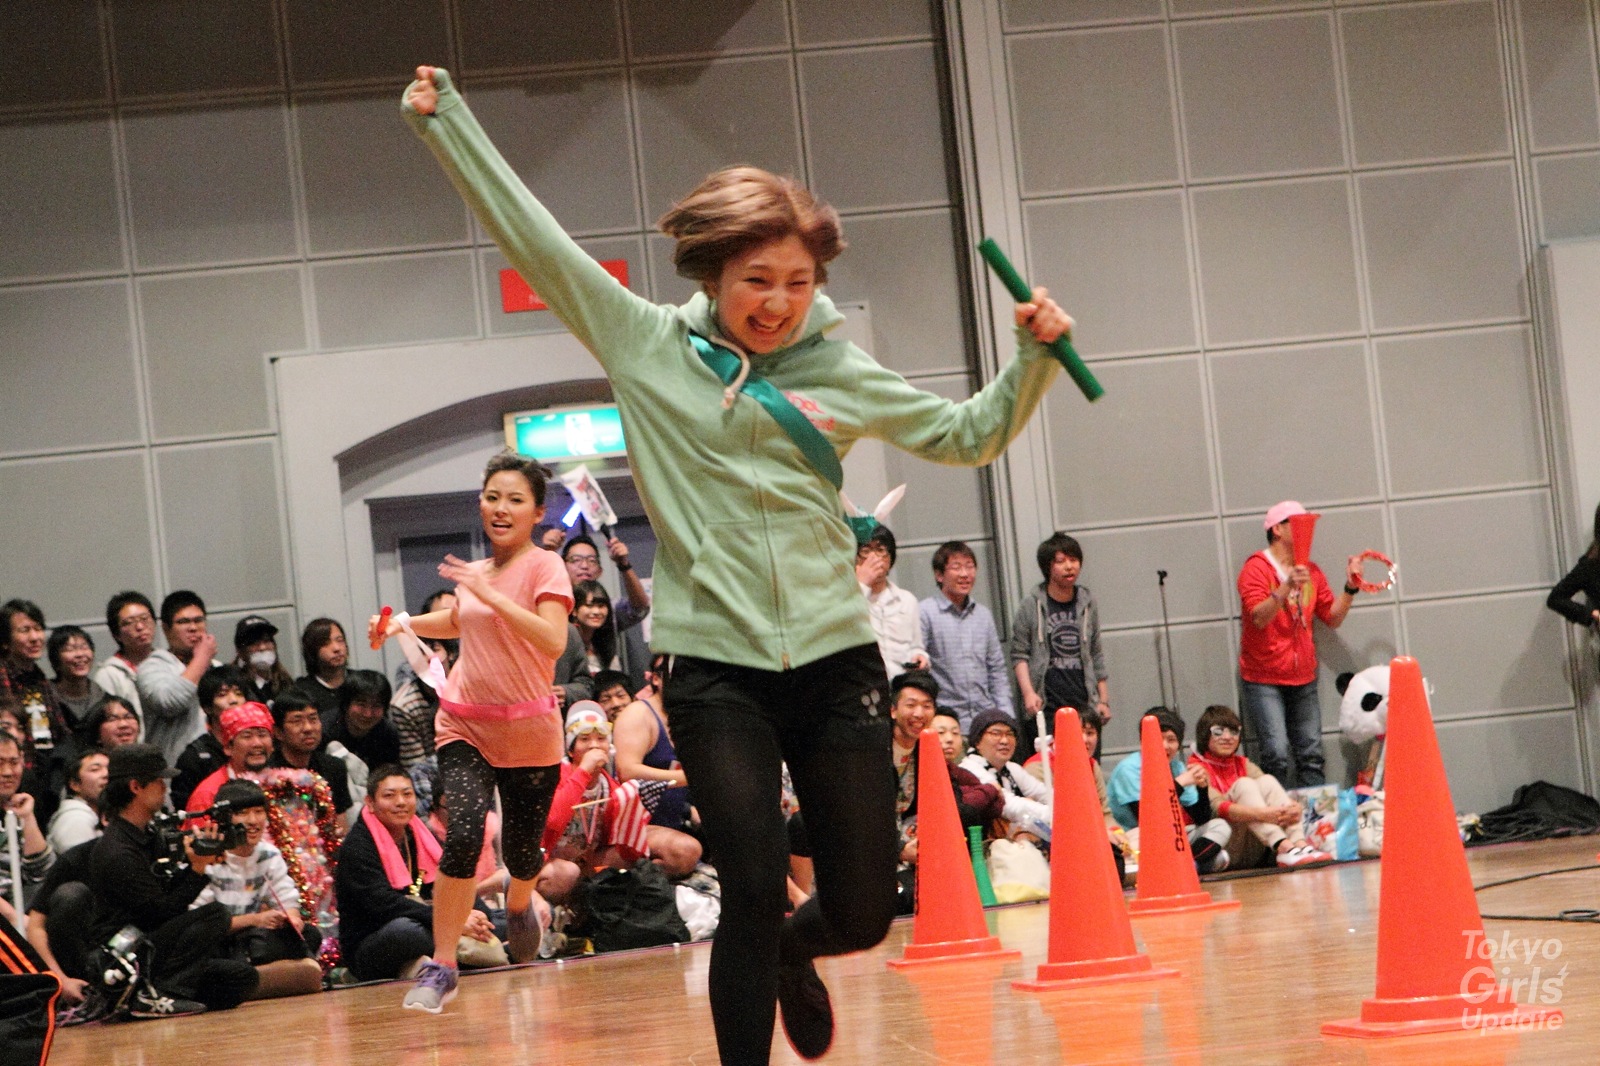 Sports Day in Japan: Everyone’s Big Day to Shine!